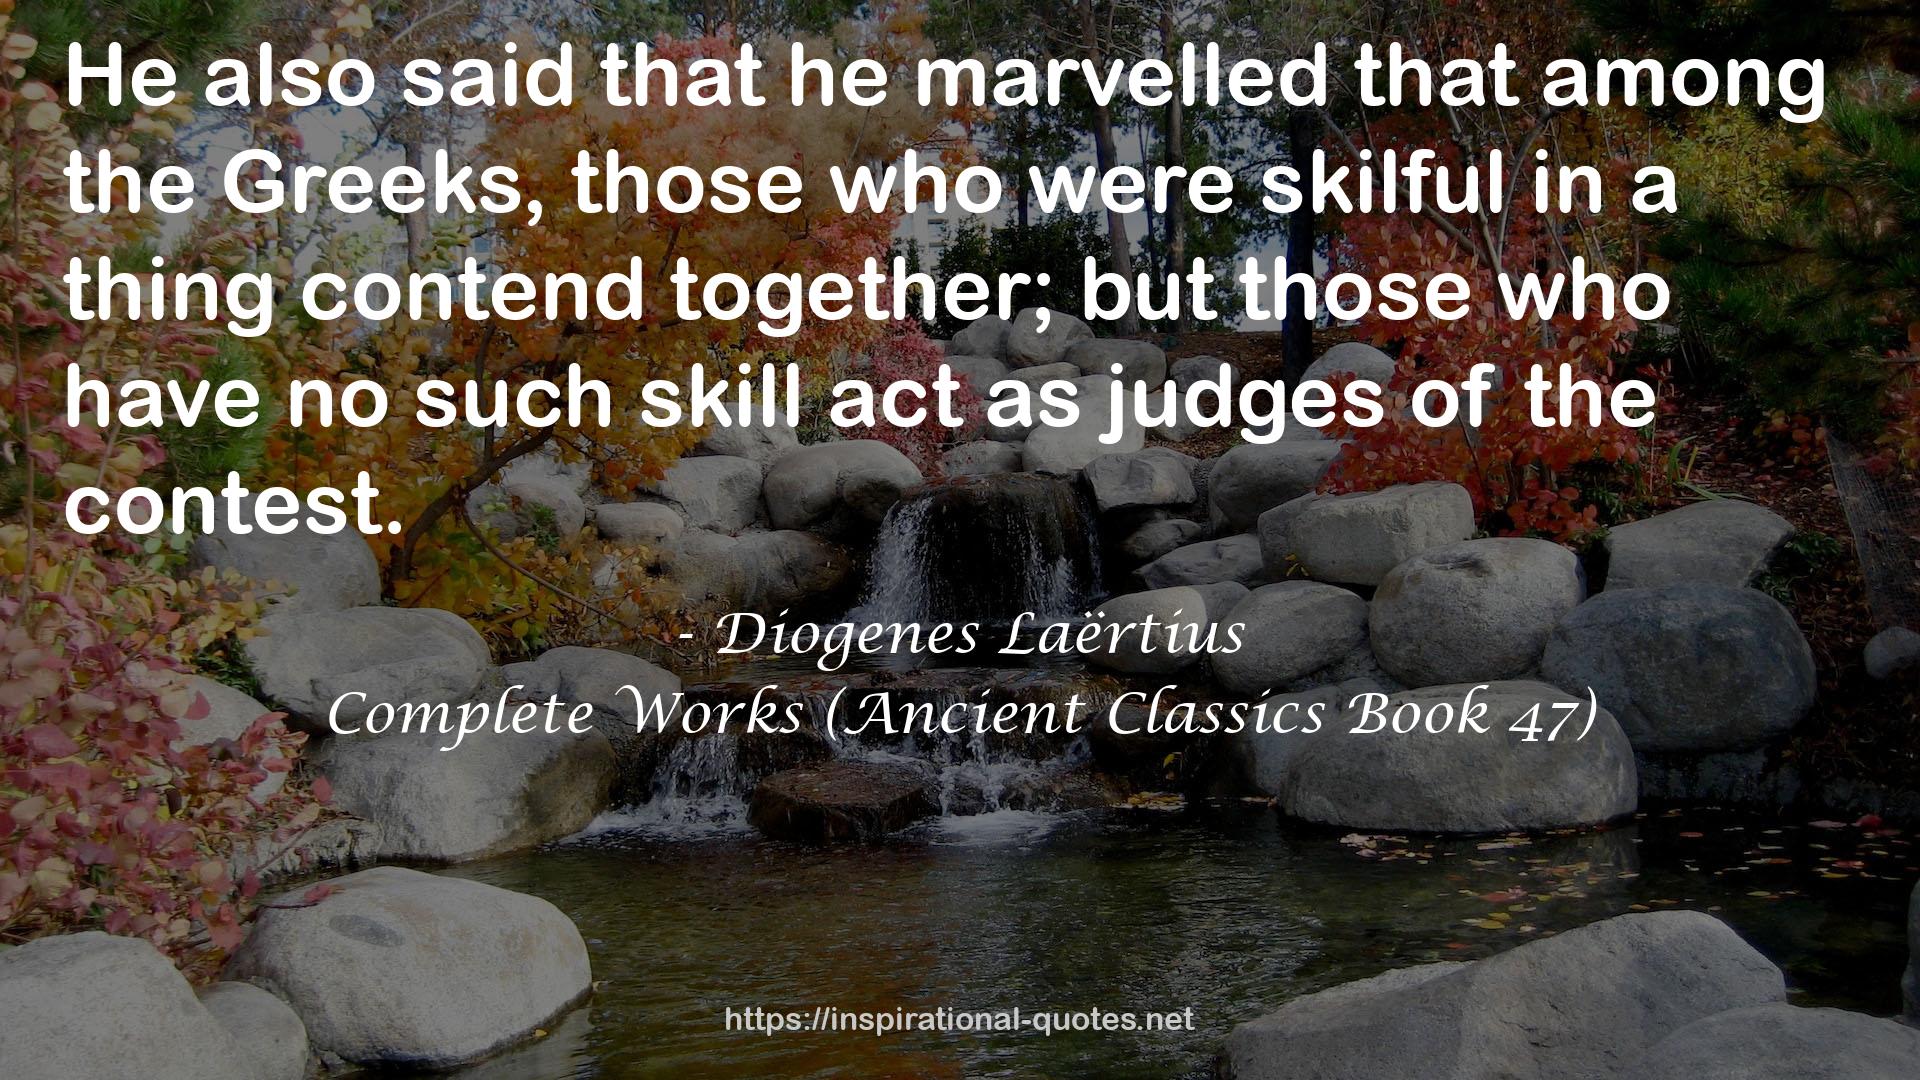 Complete Works (Ancient Classics Book 47) QUOTES